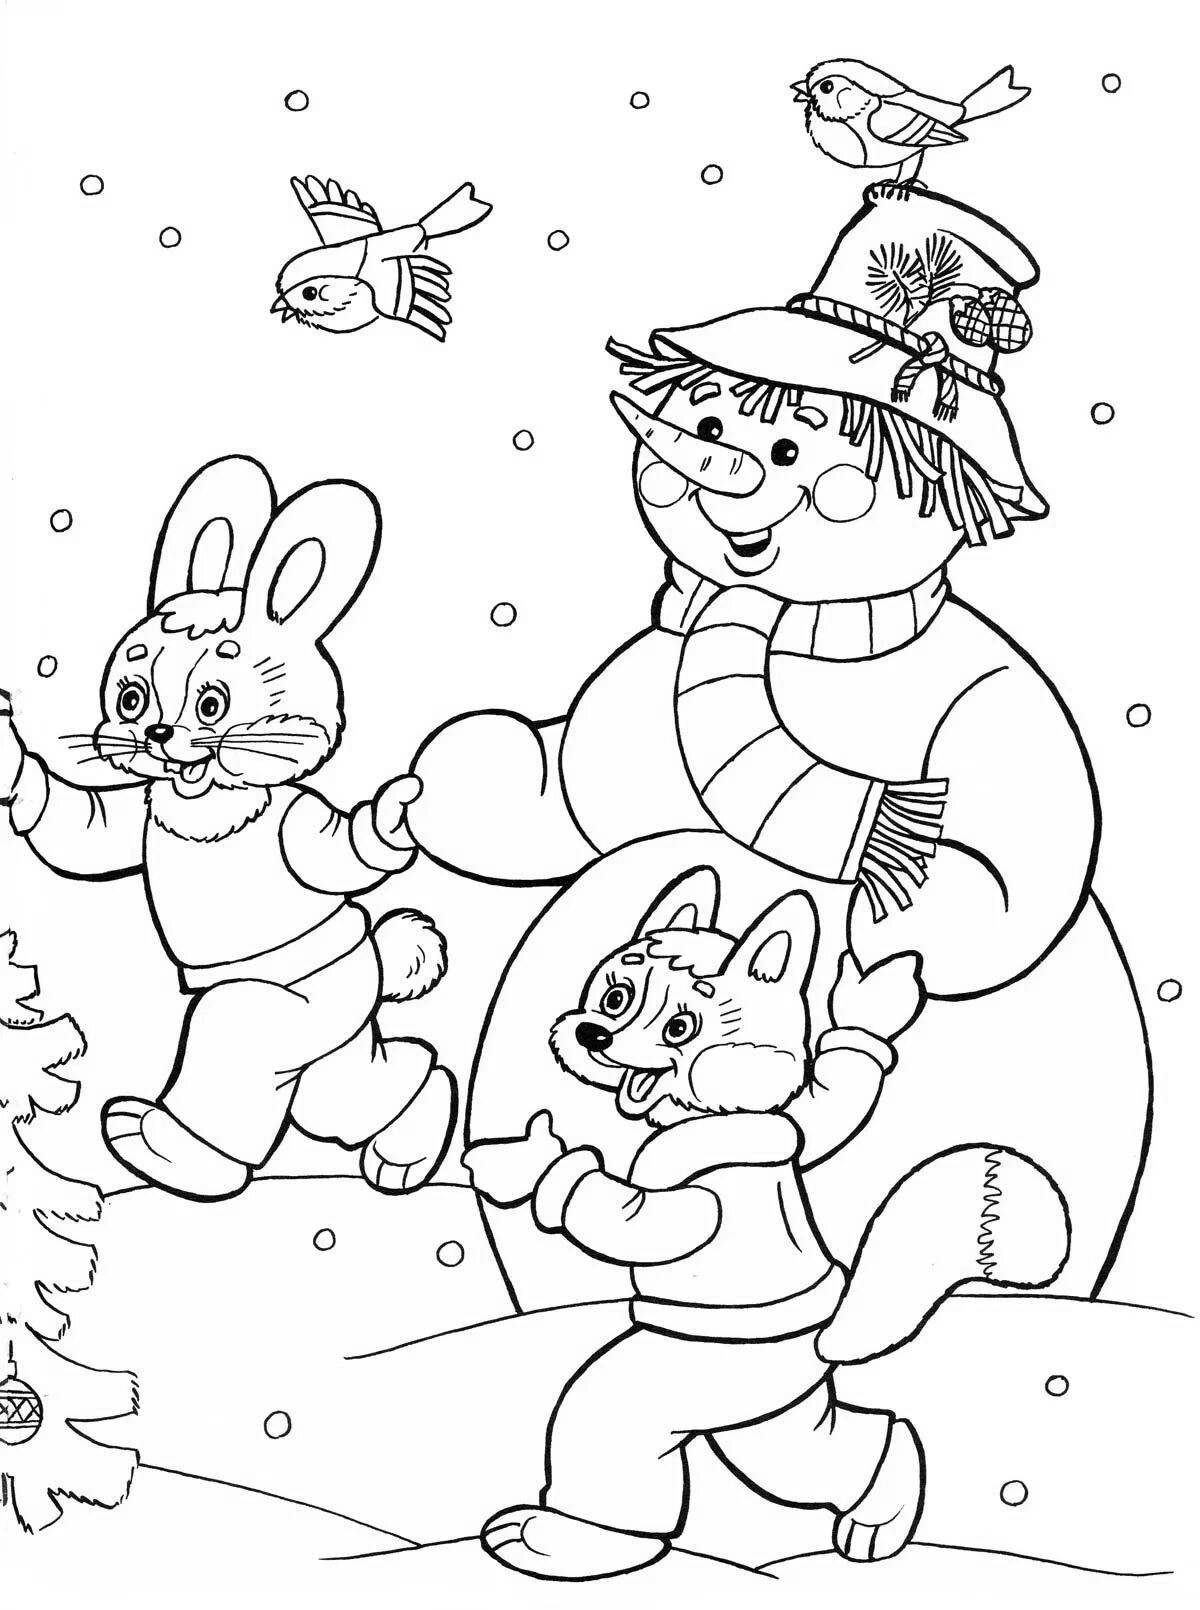 Coloring book playful hare and snowman